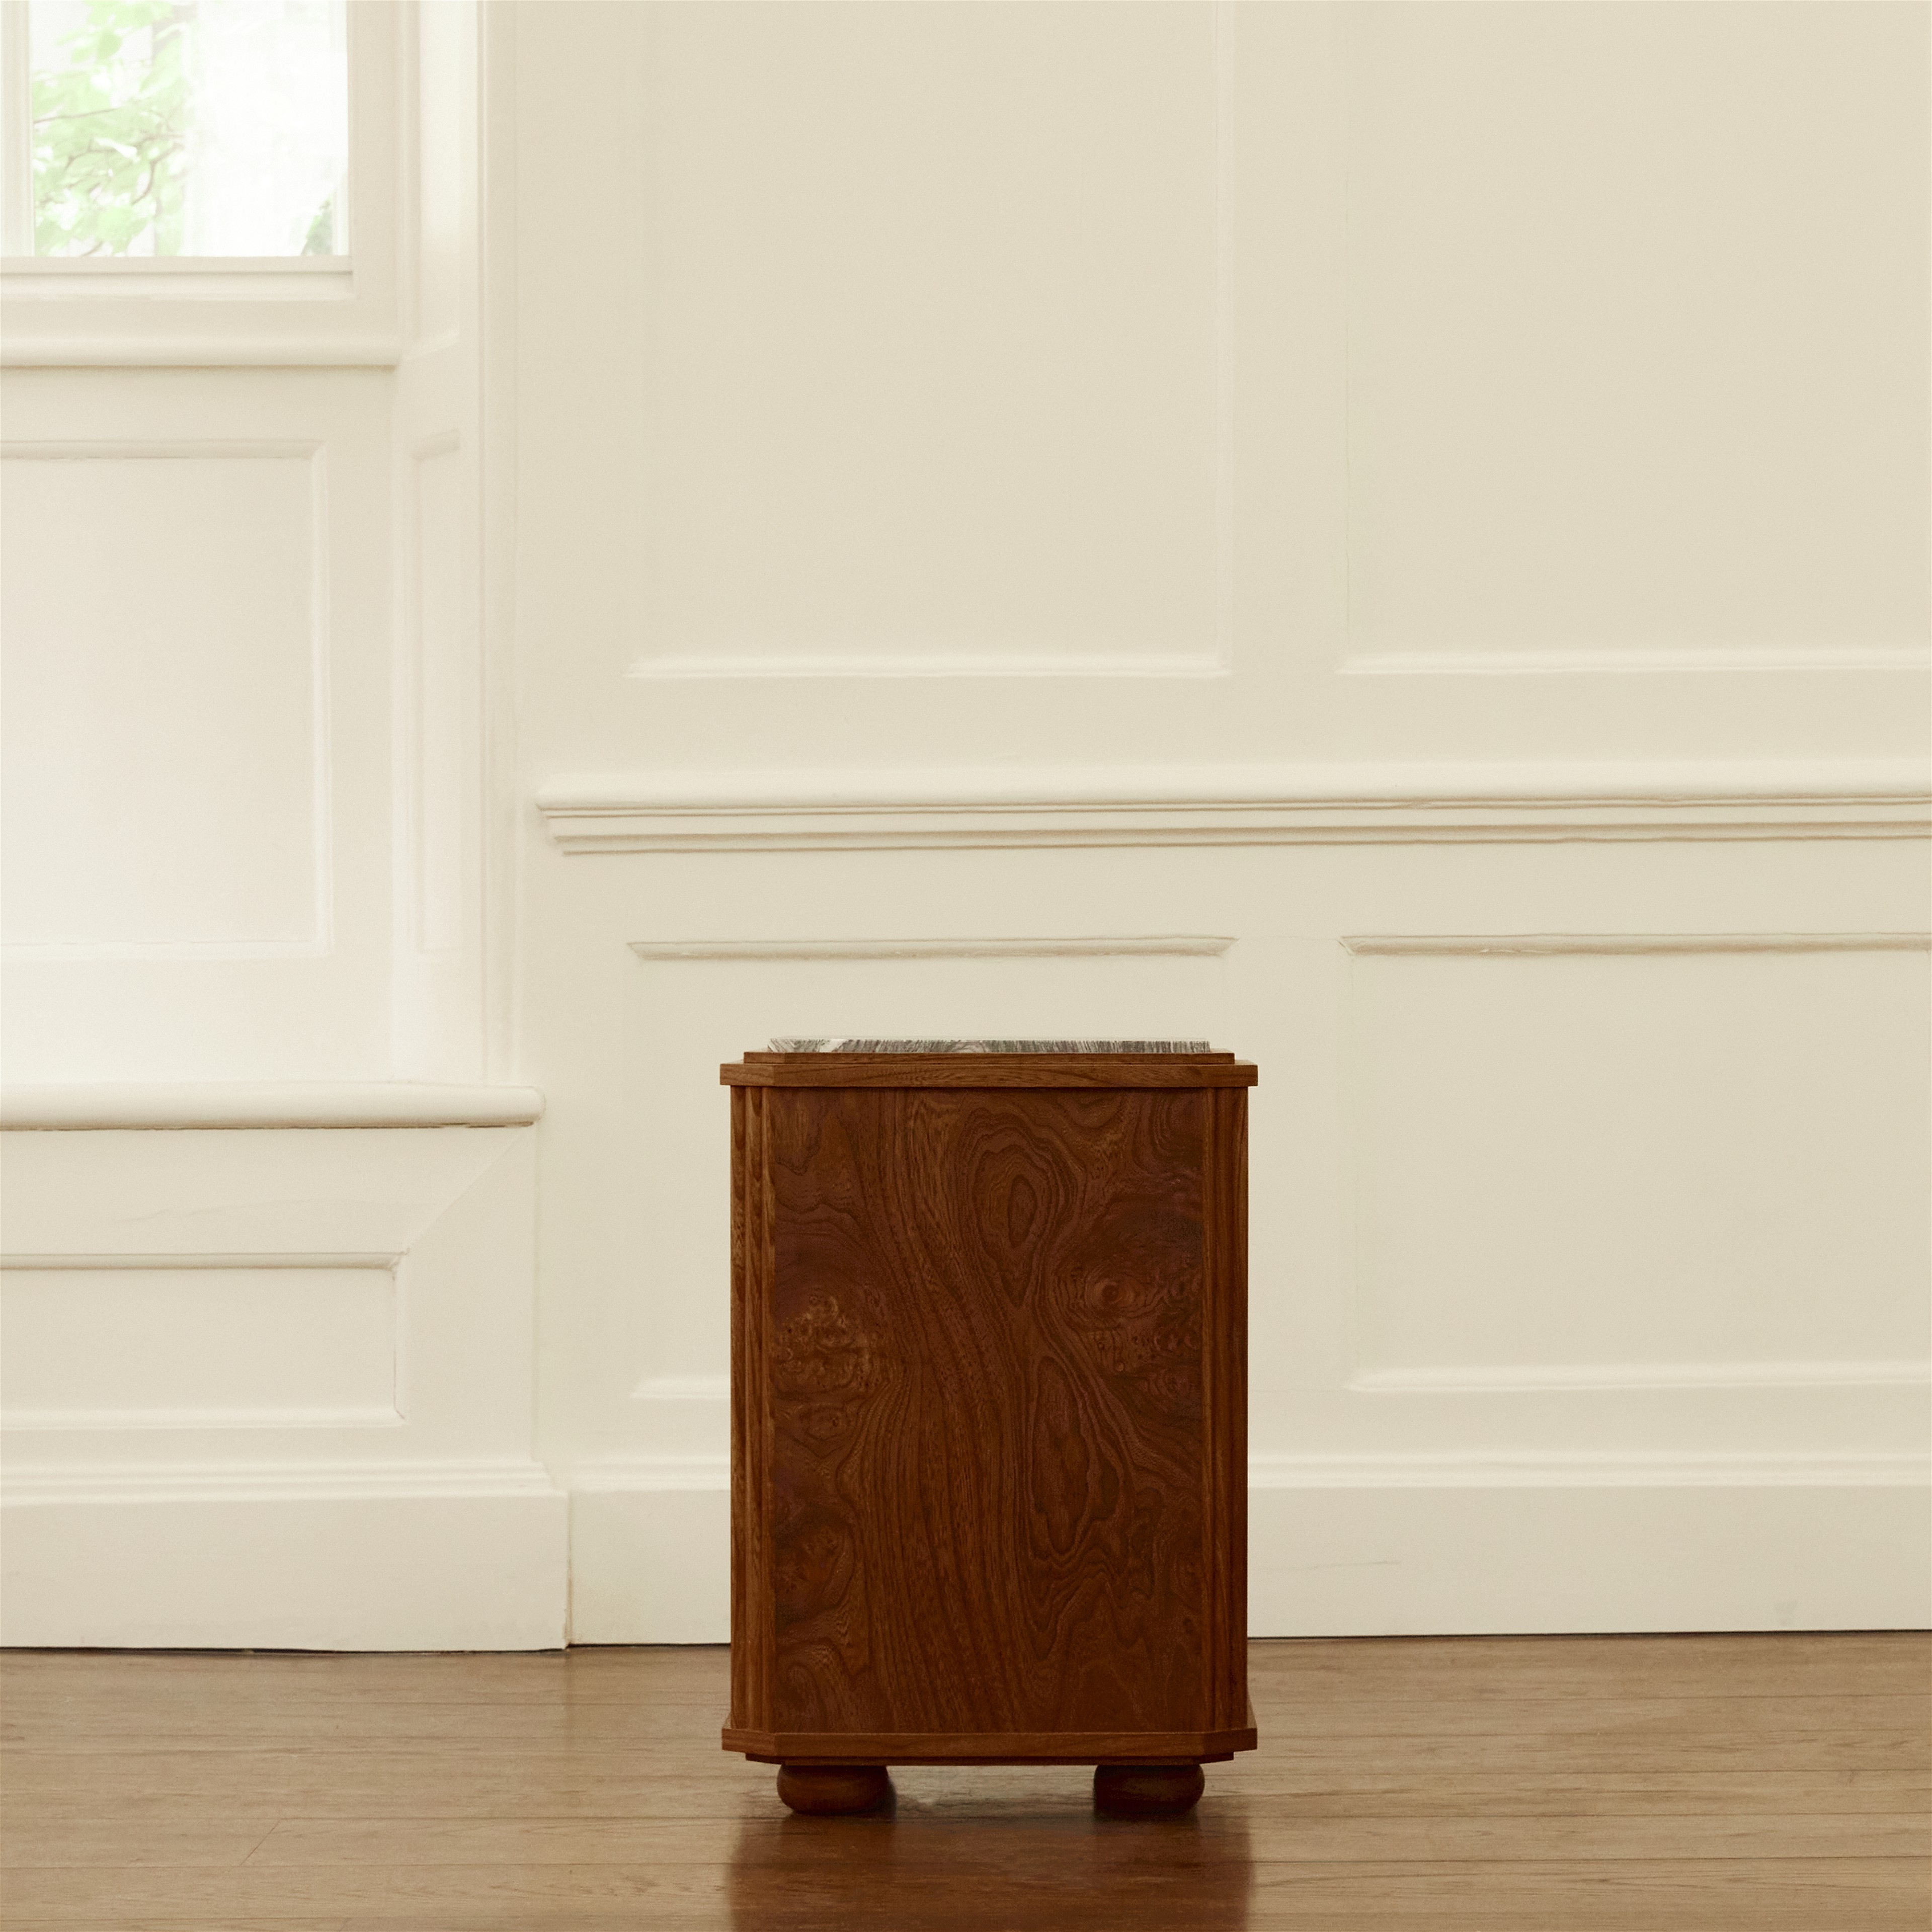 a wooden trash can sitting on top of a hard wood floor